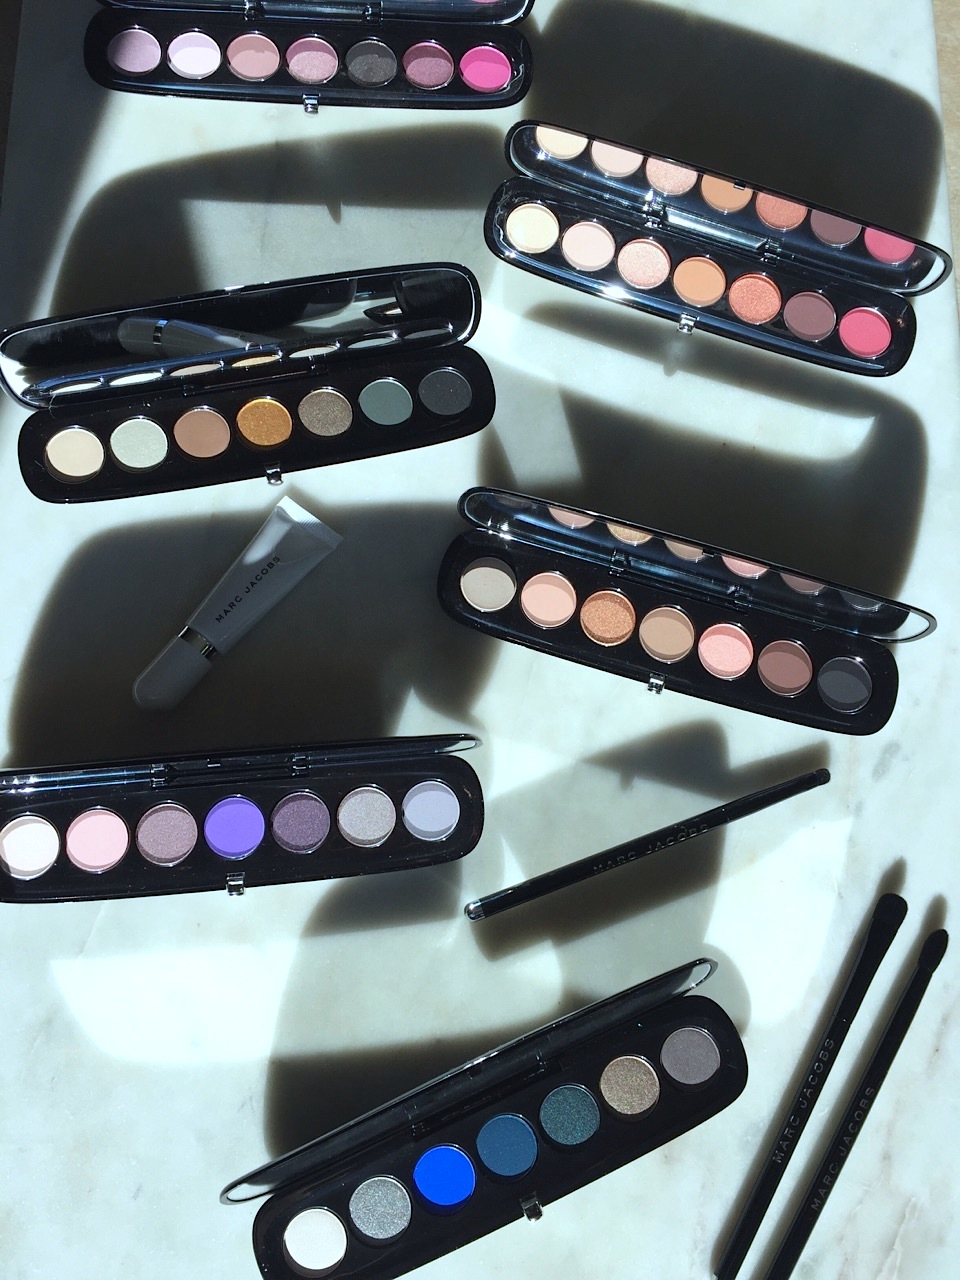 Marc Jacobs Beauty Eye-conic Multi-Finish Eyeshadow Palette: A quick review